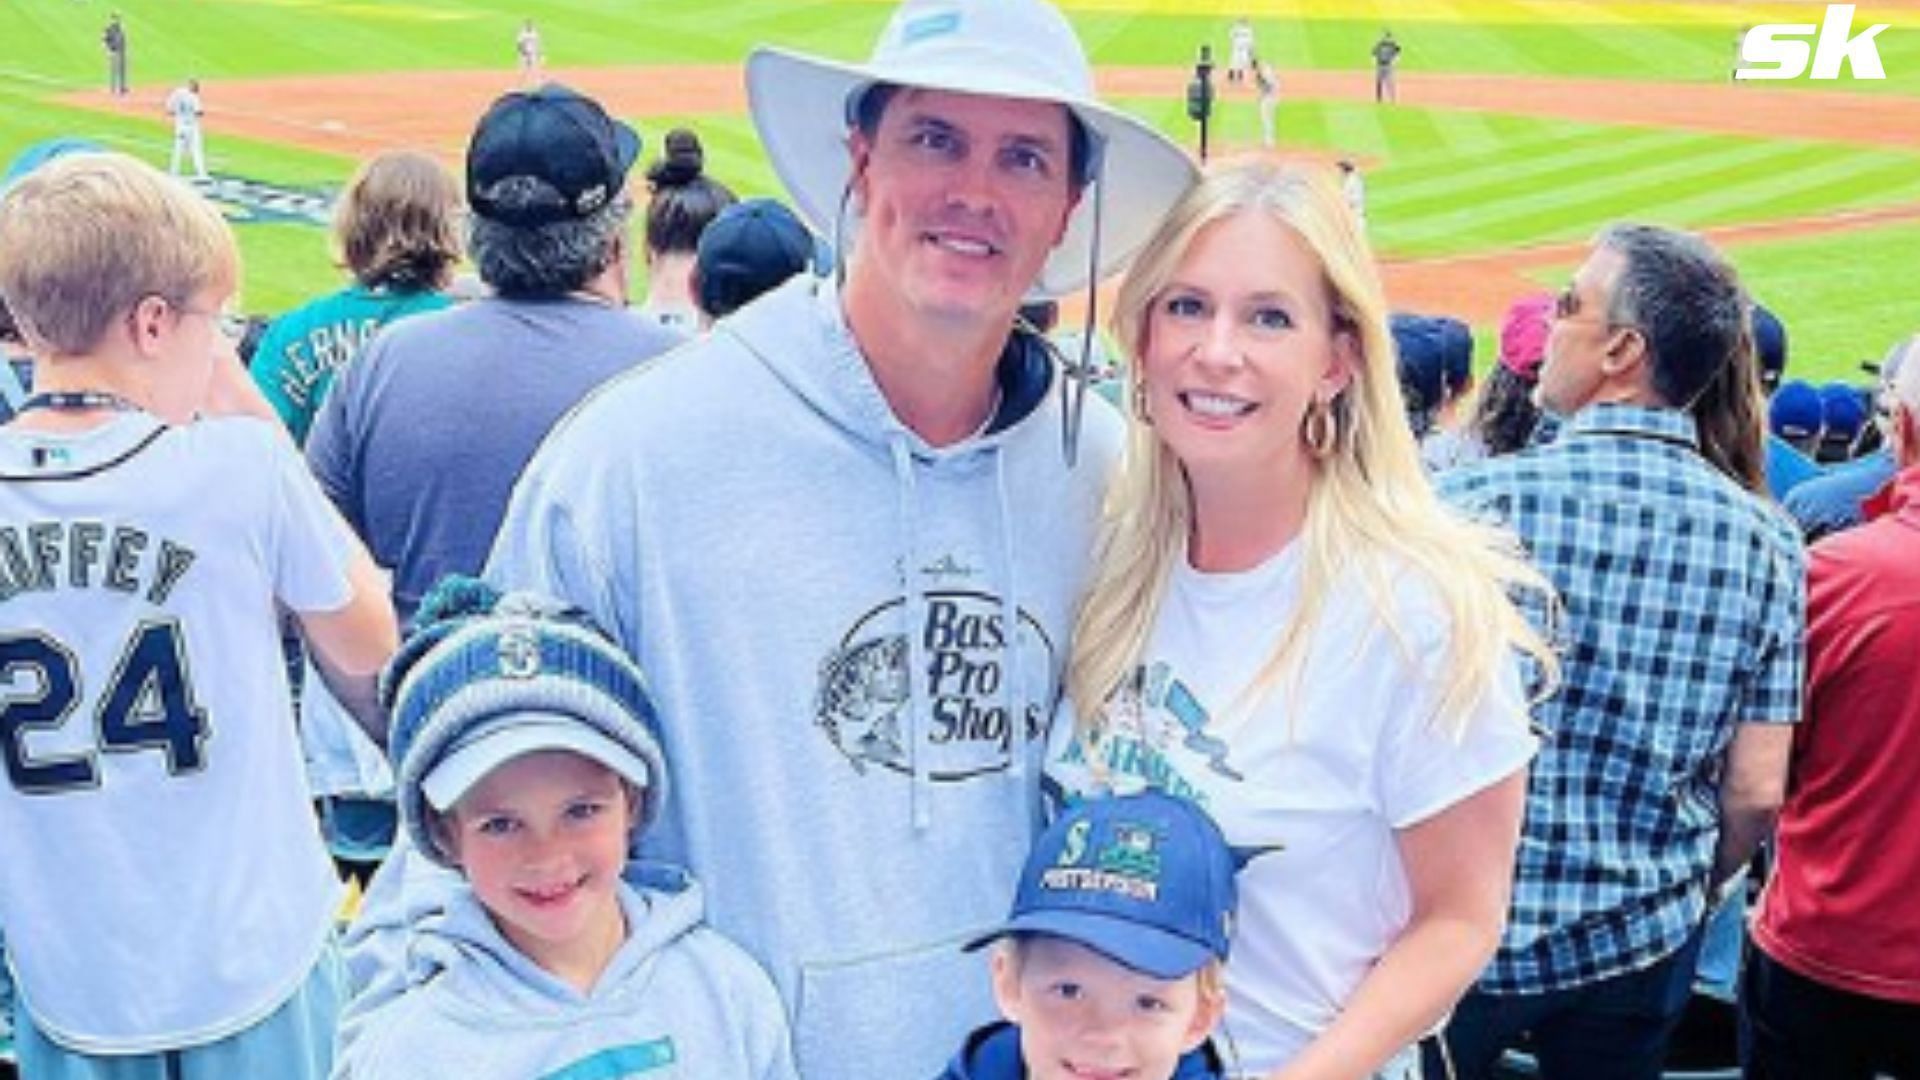 Emily Greinke: Only Zack could fly under the radar with his fishing hat  and bass pro sweatshirt all day